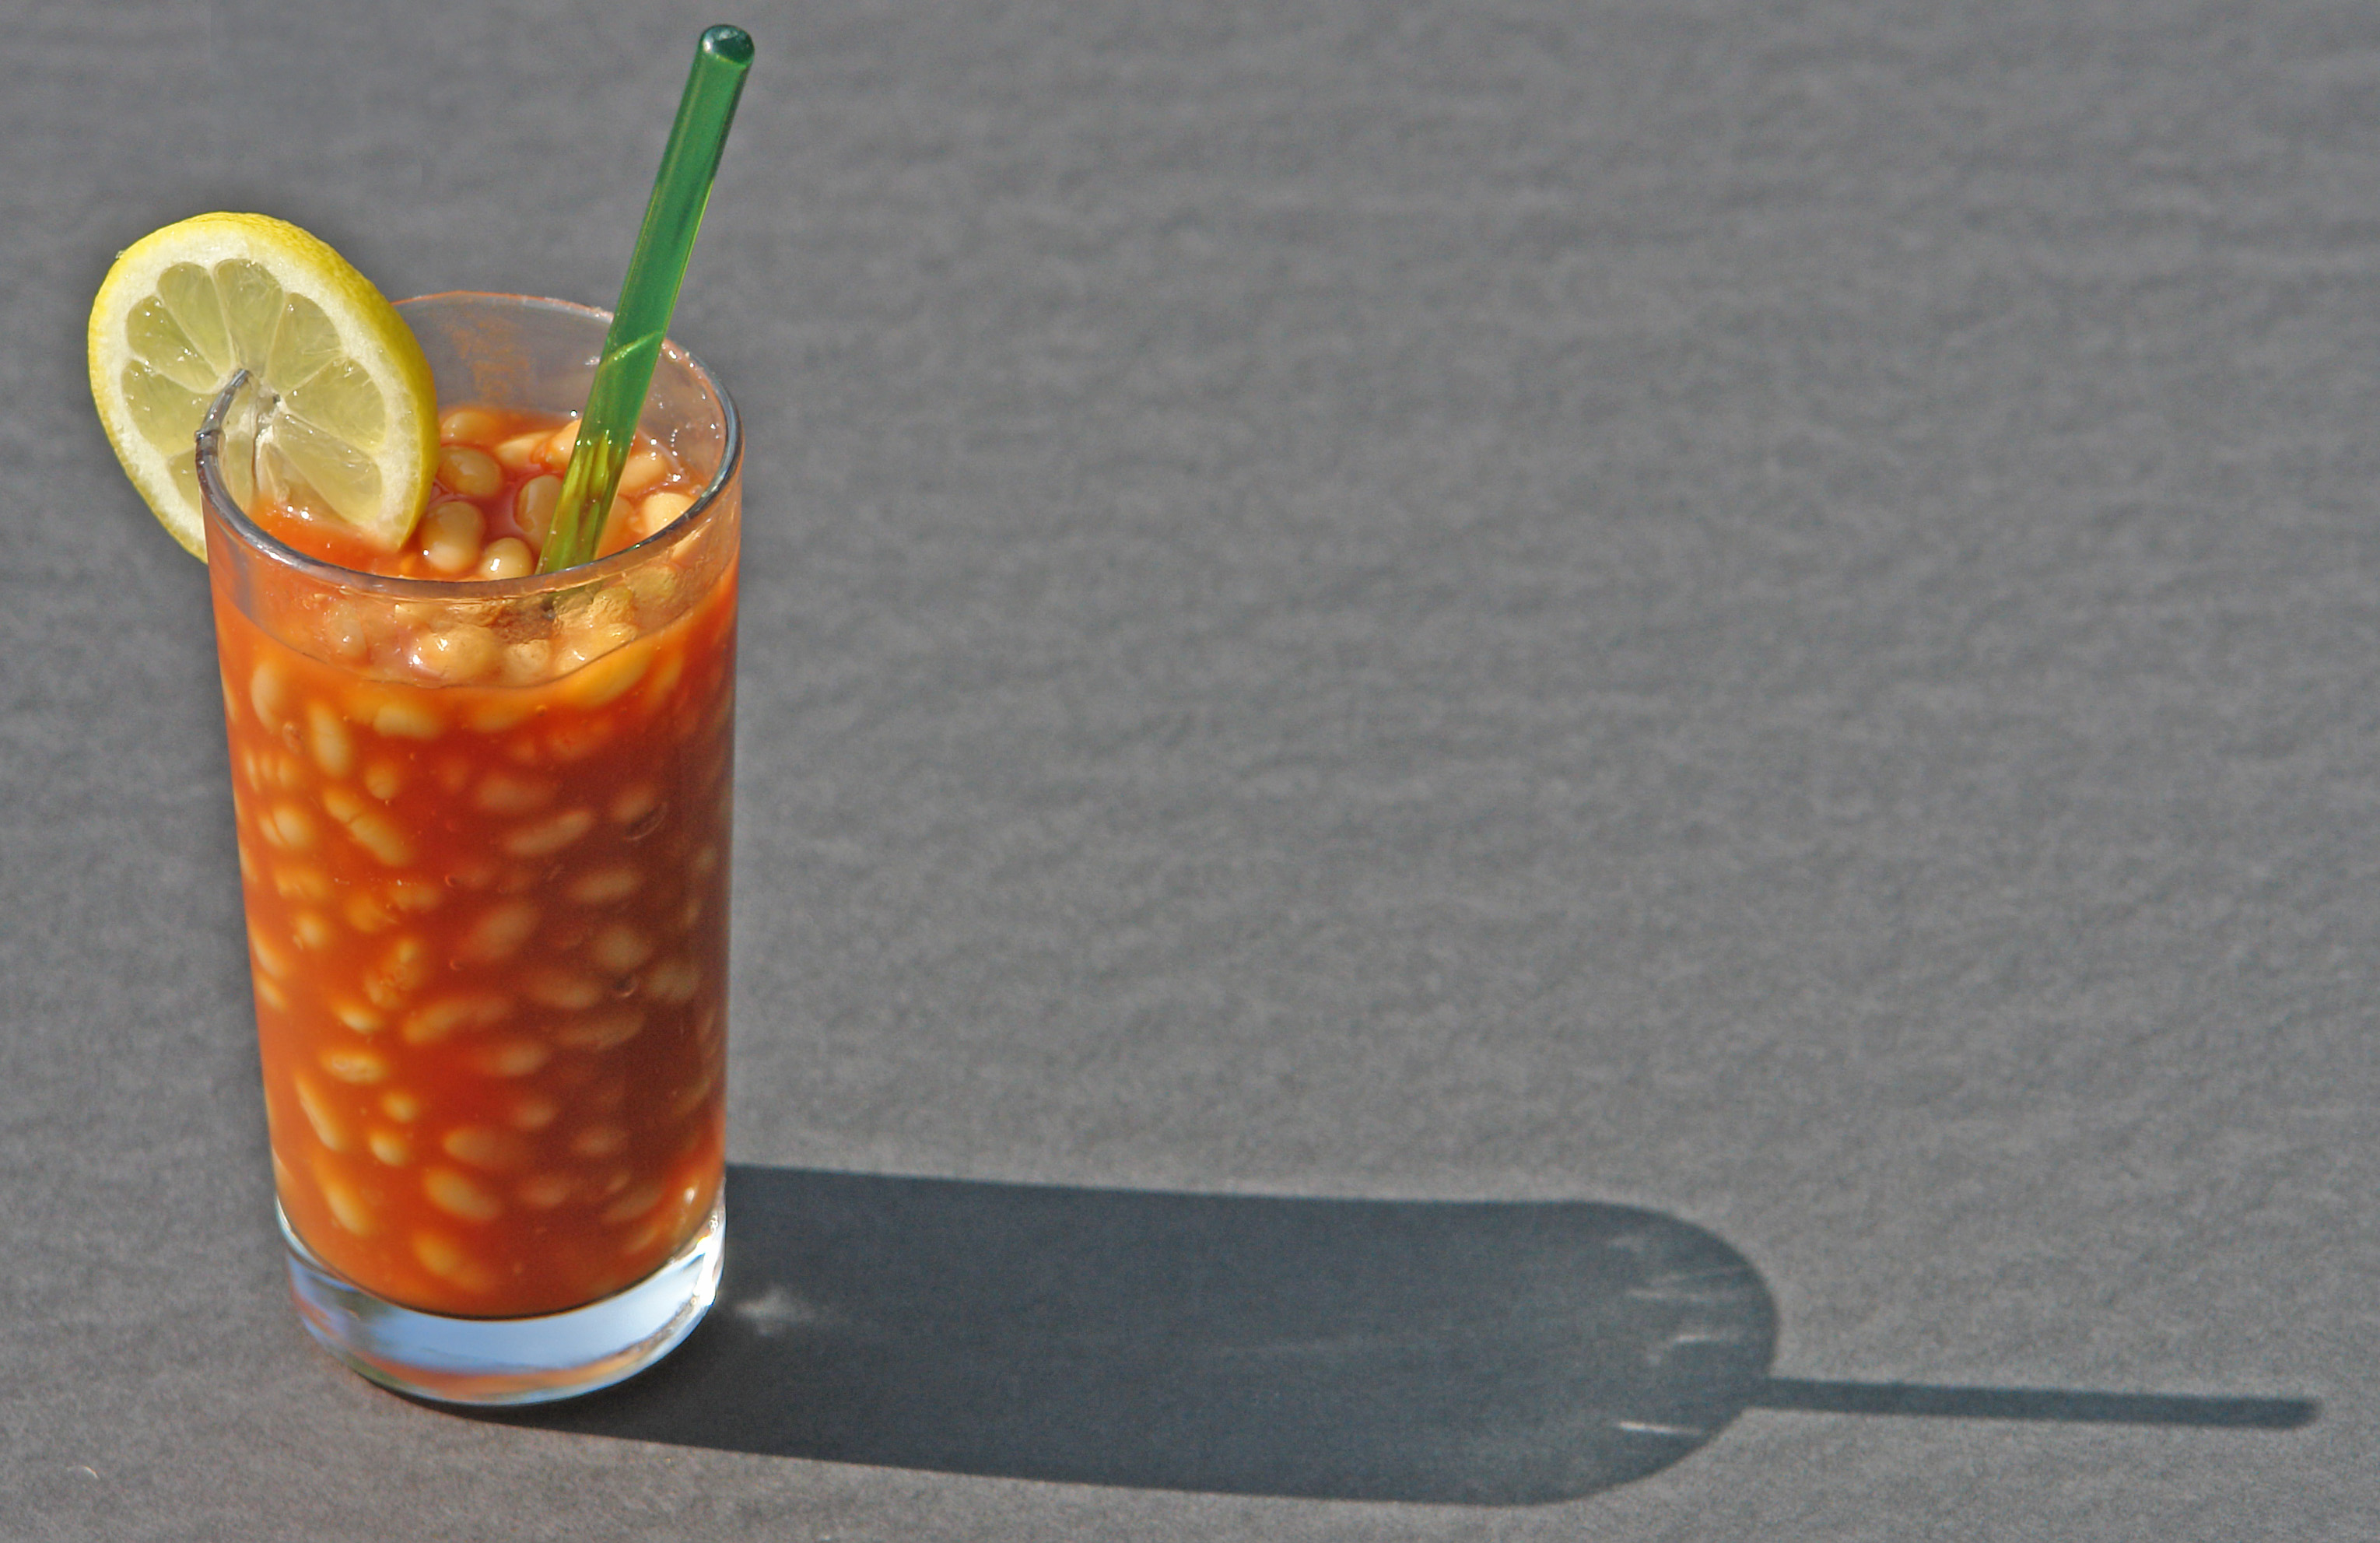 Thumbnail of Baked Bean Cocktail